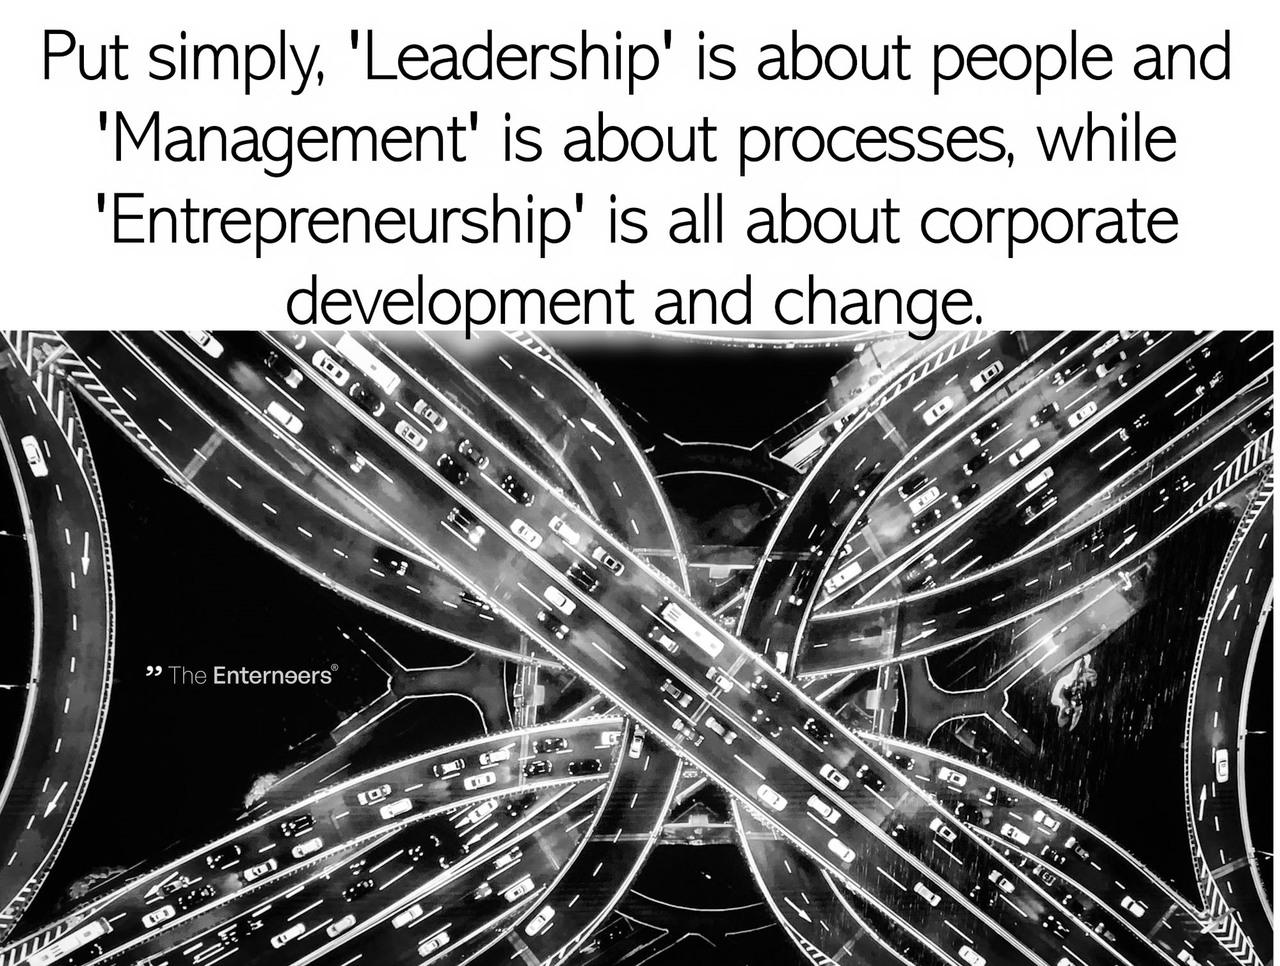 Entrepreneurship is all about corporate development and change